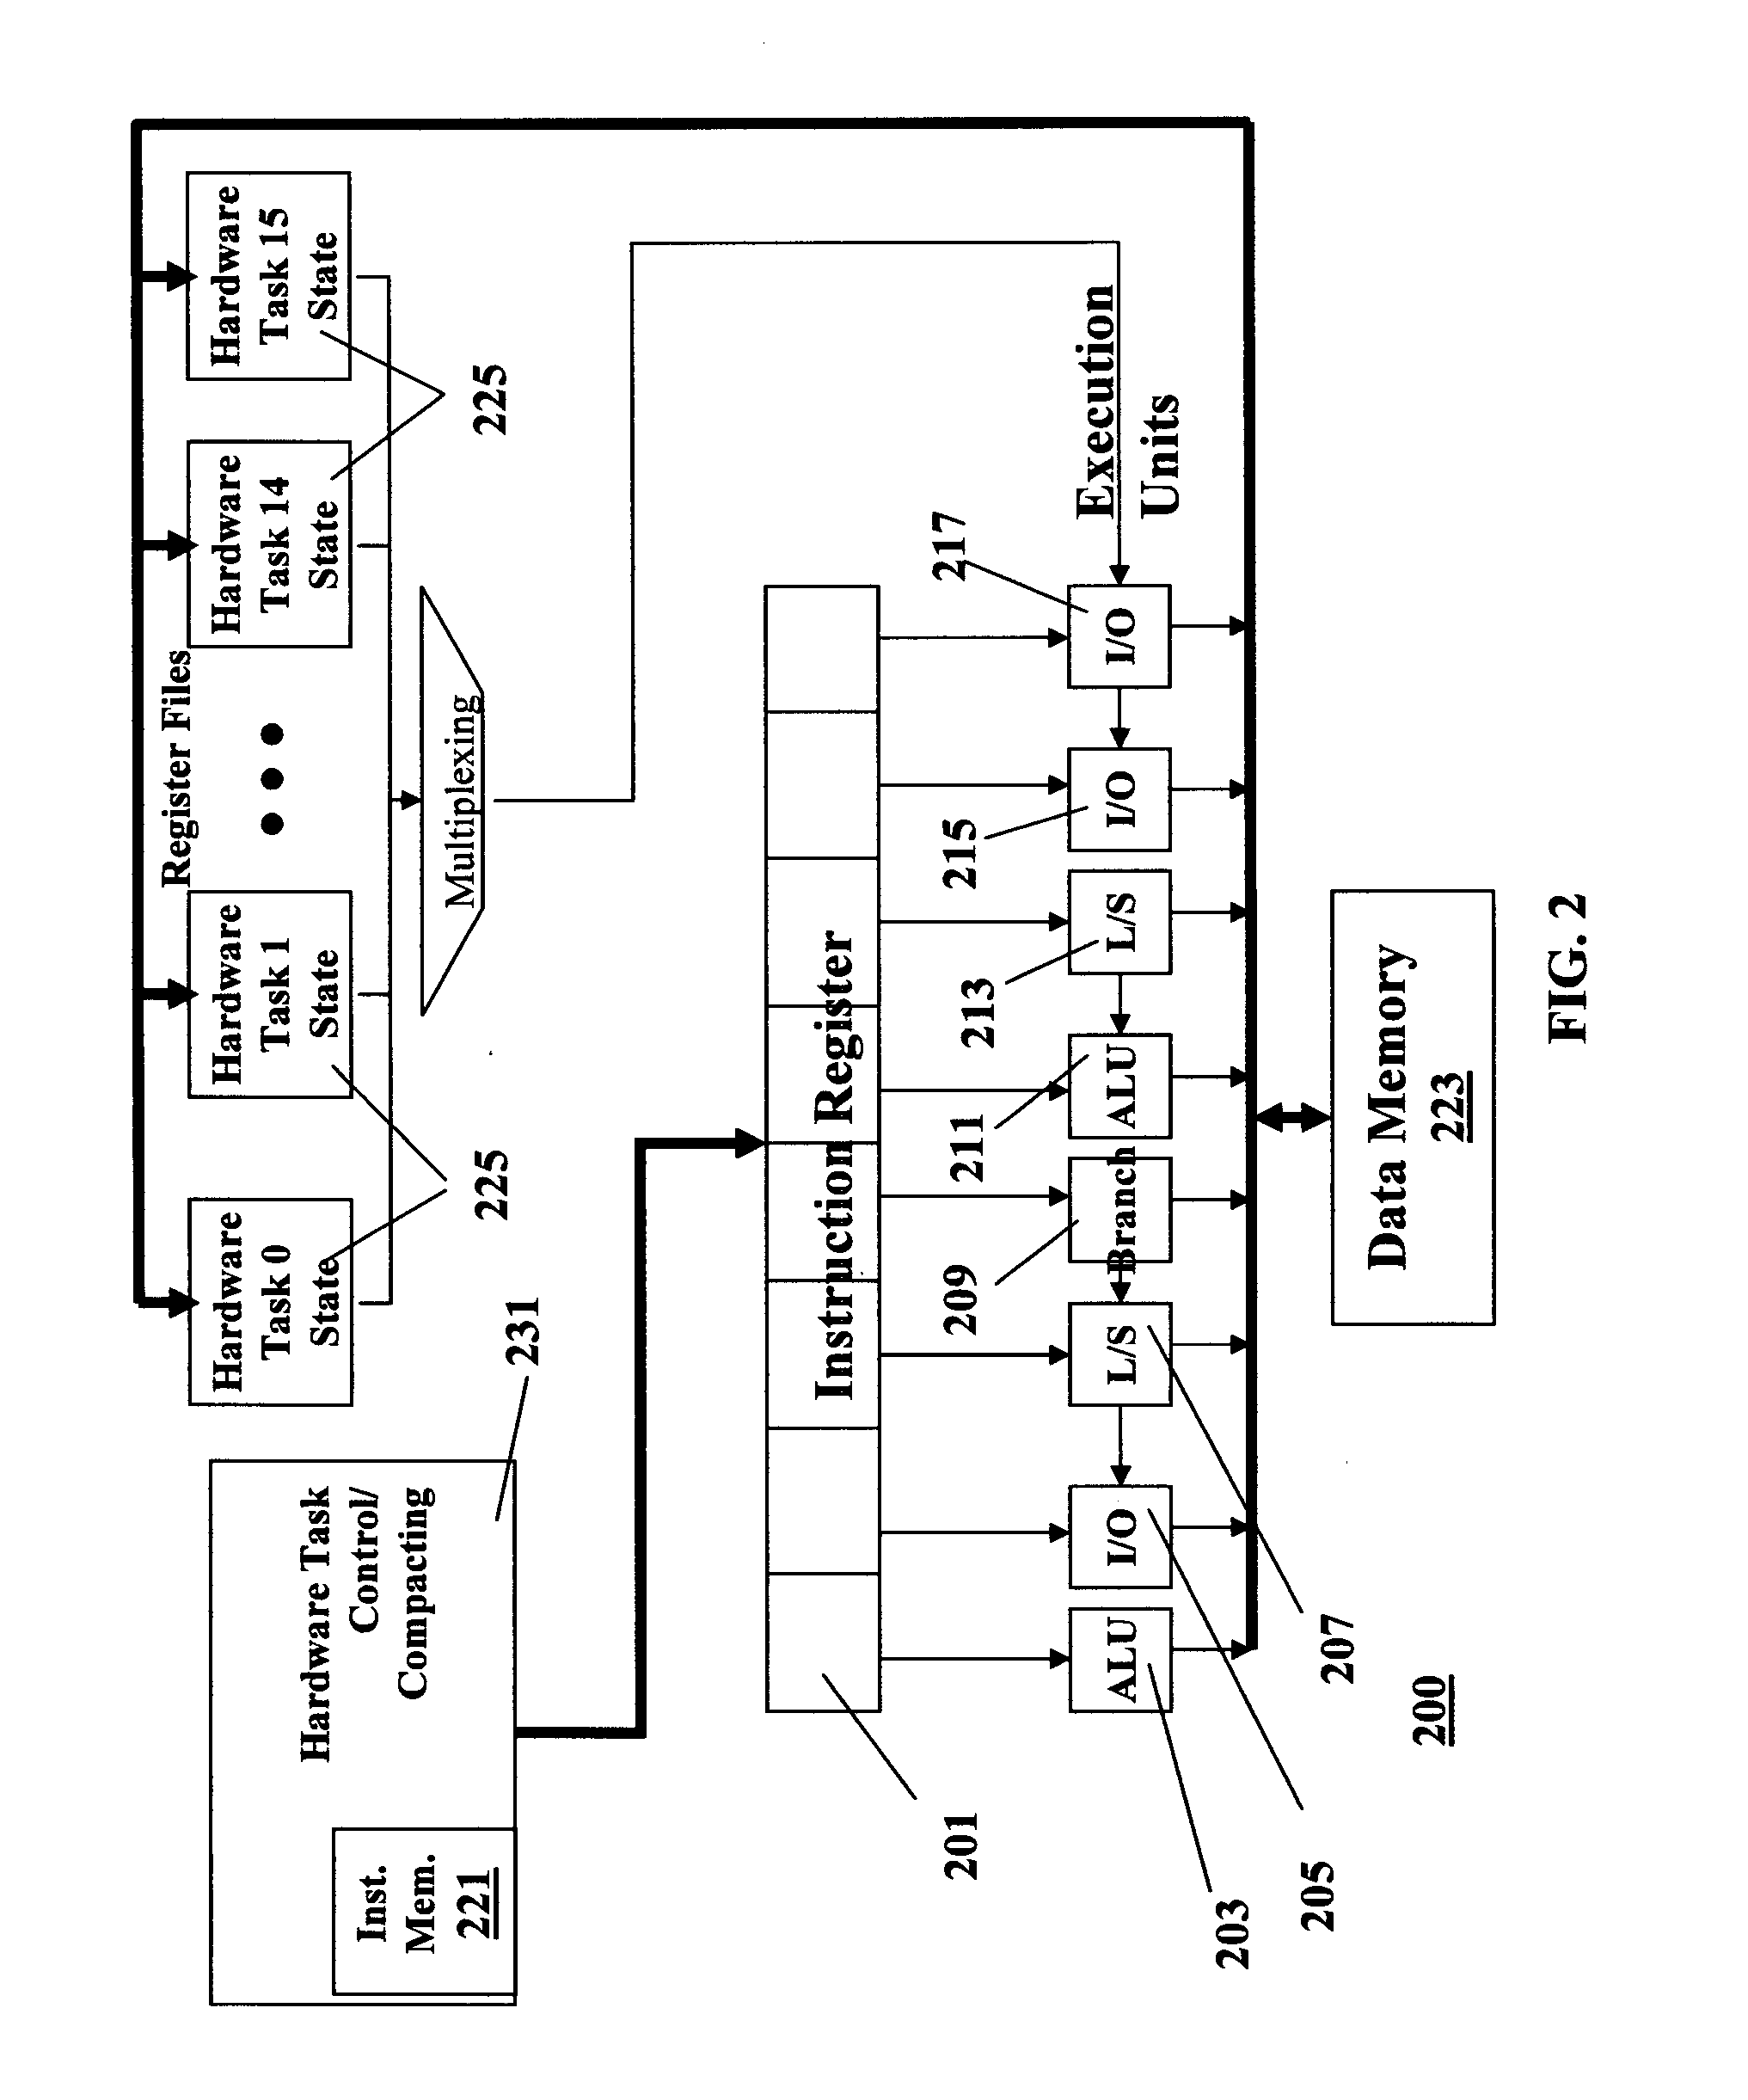 Architecture and method for providing integrated circuits